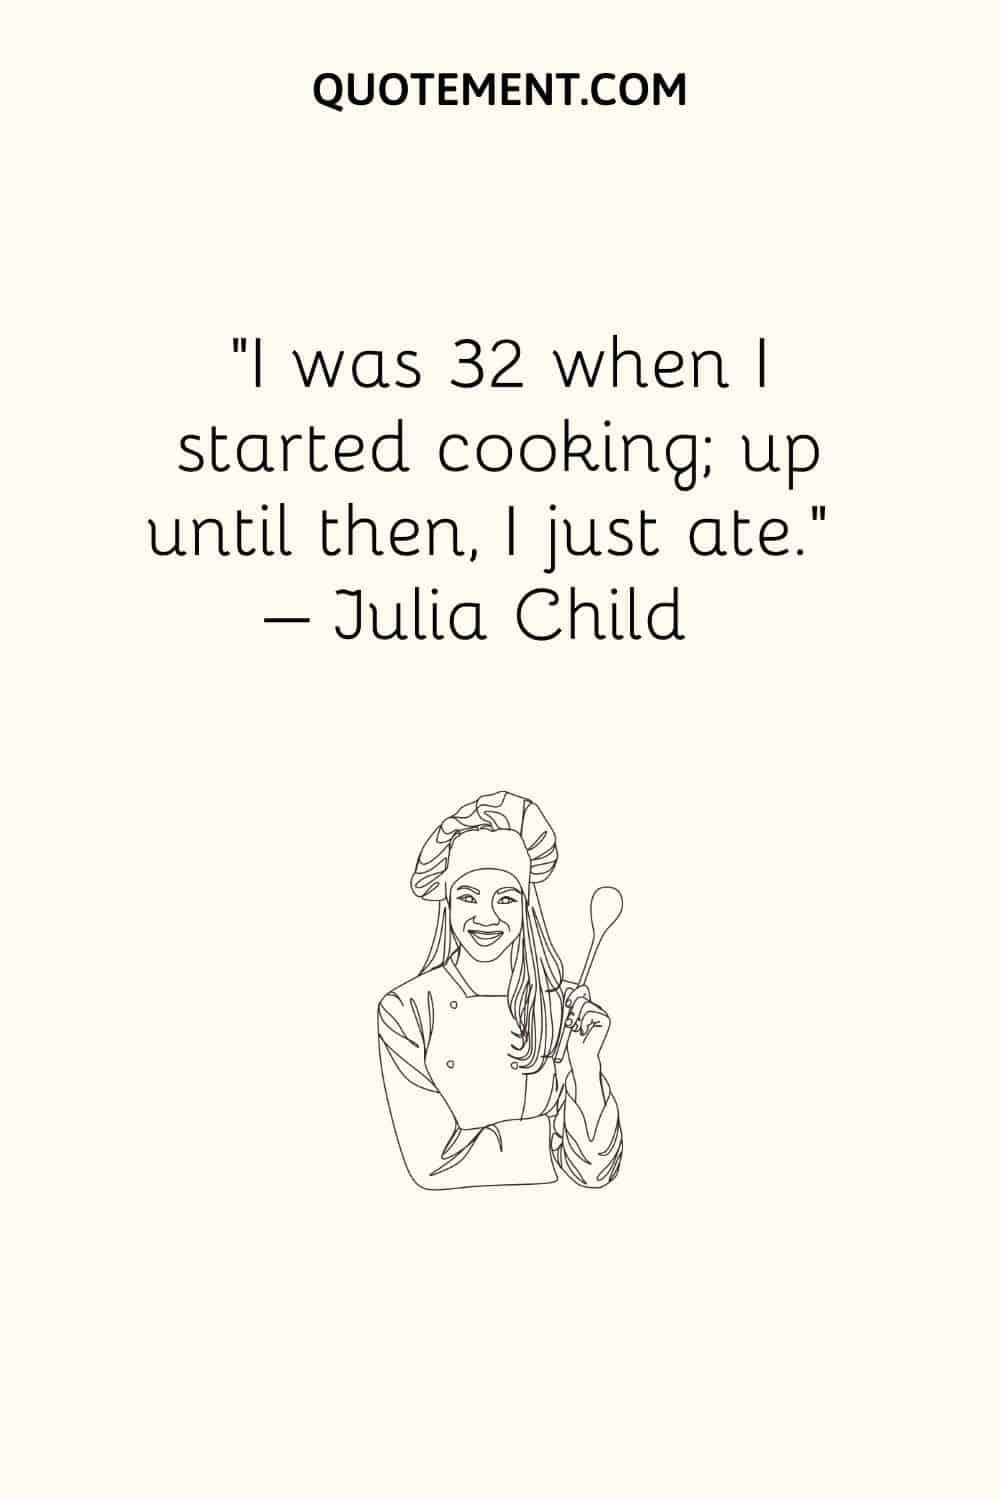 Illustration of a funny and cute cooking quote.